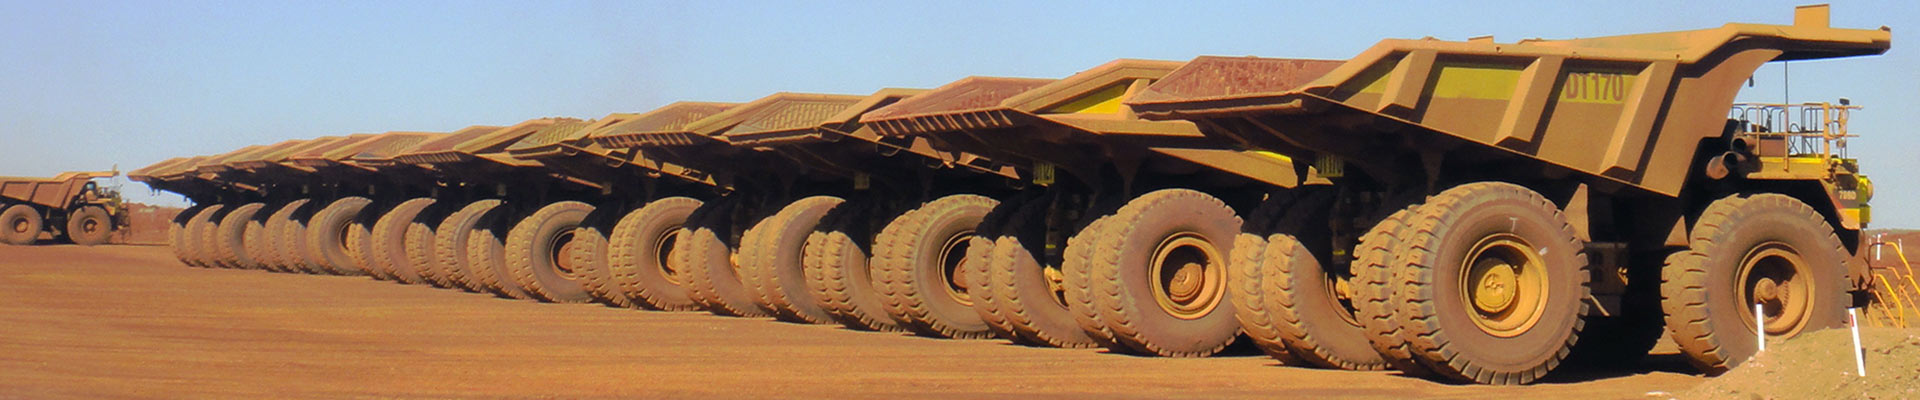 Cheap off road tires online for mining trucks